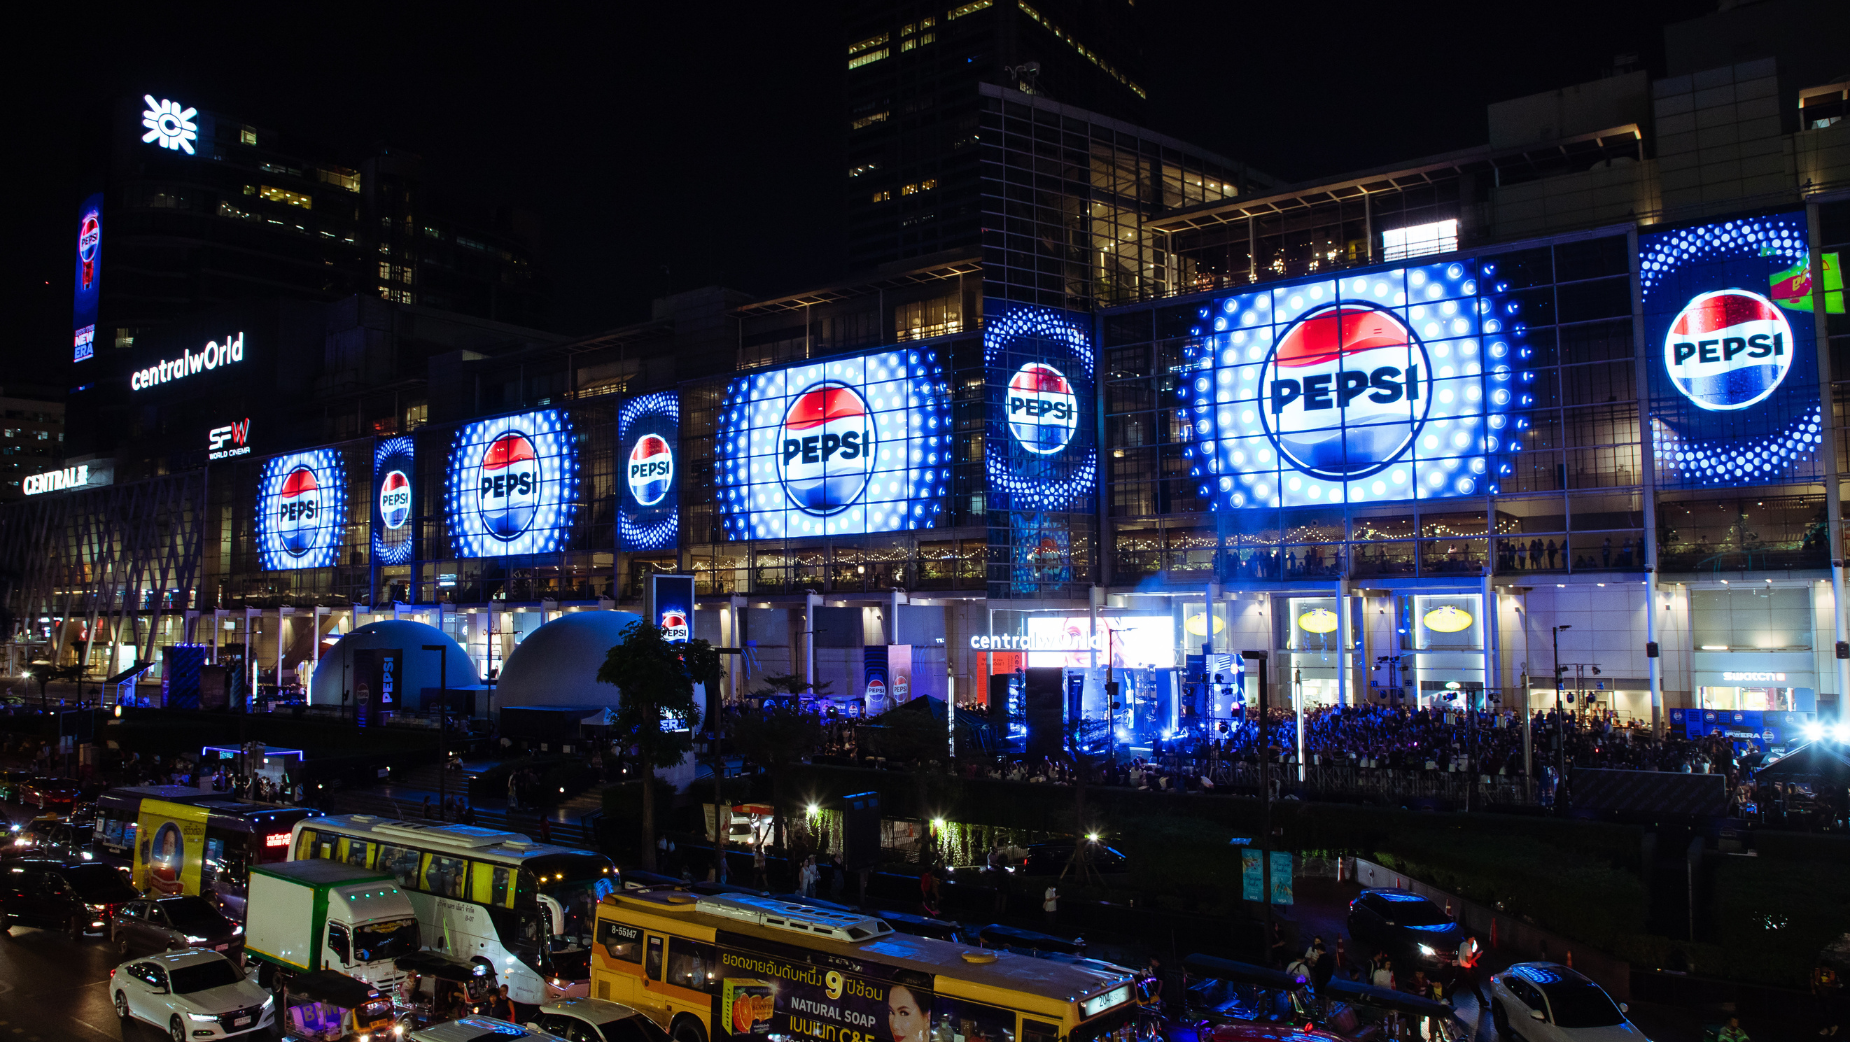 Pepsi Enters New Era With the Fizziest Launch in Thailand, With Vaynermedia